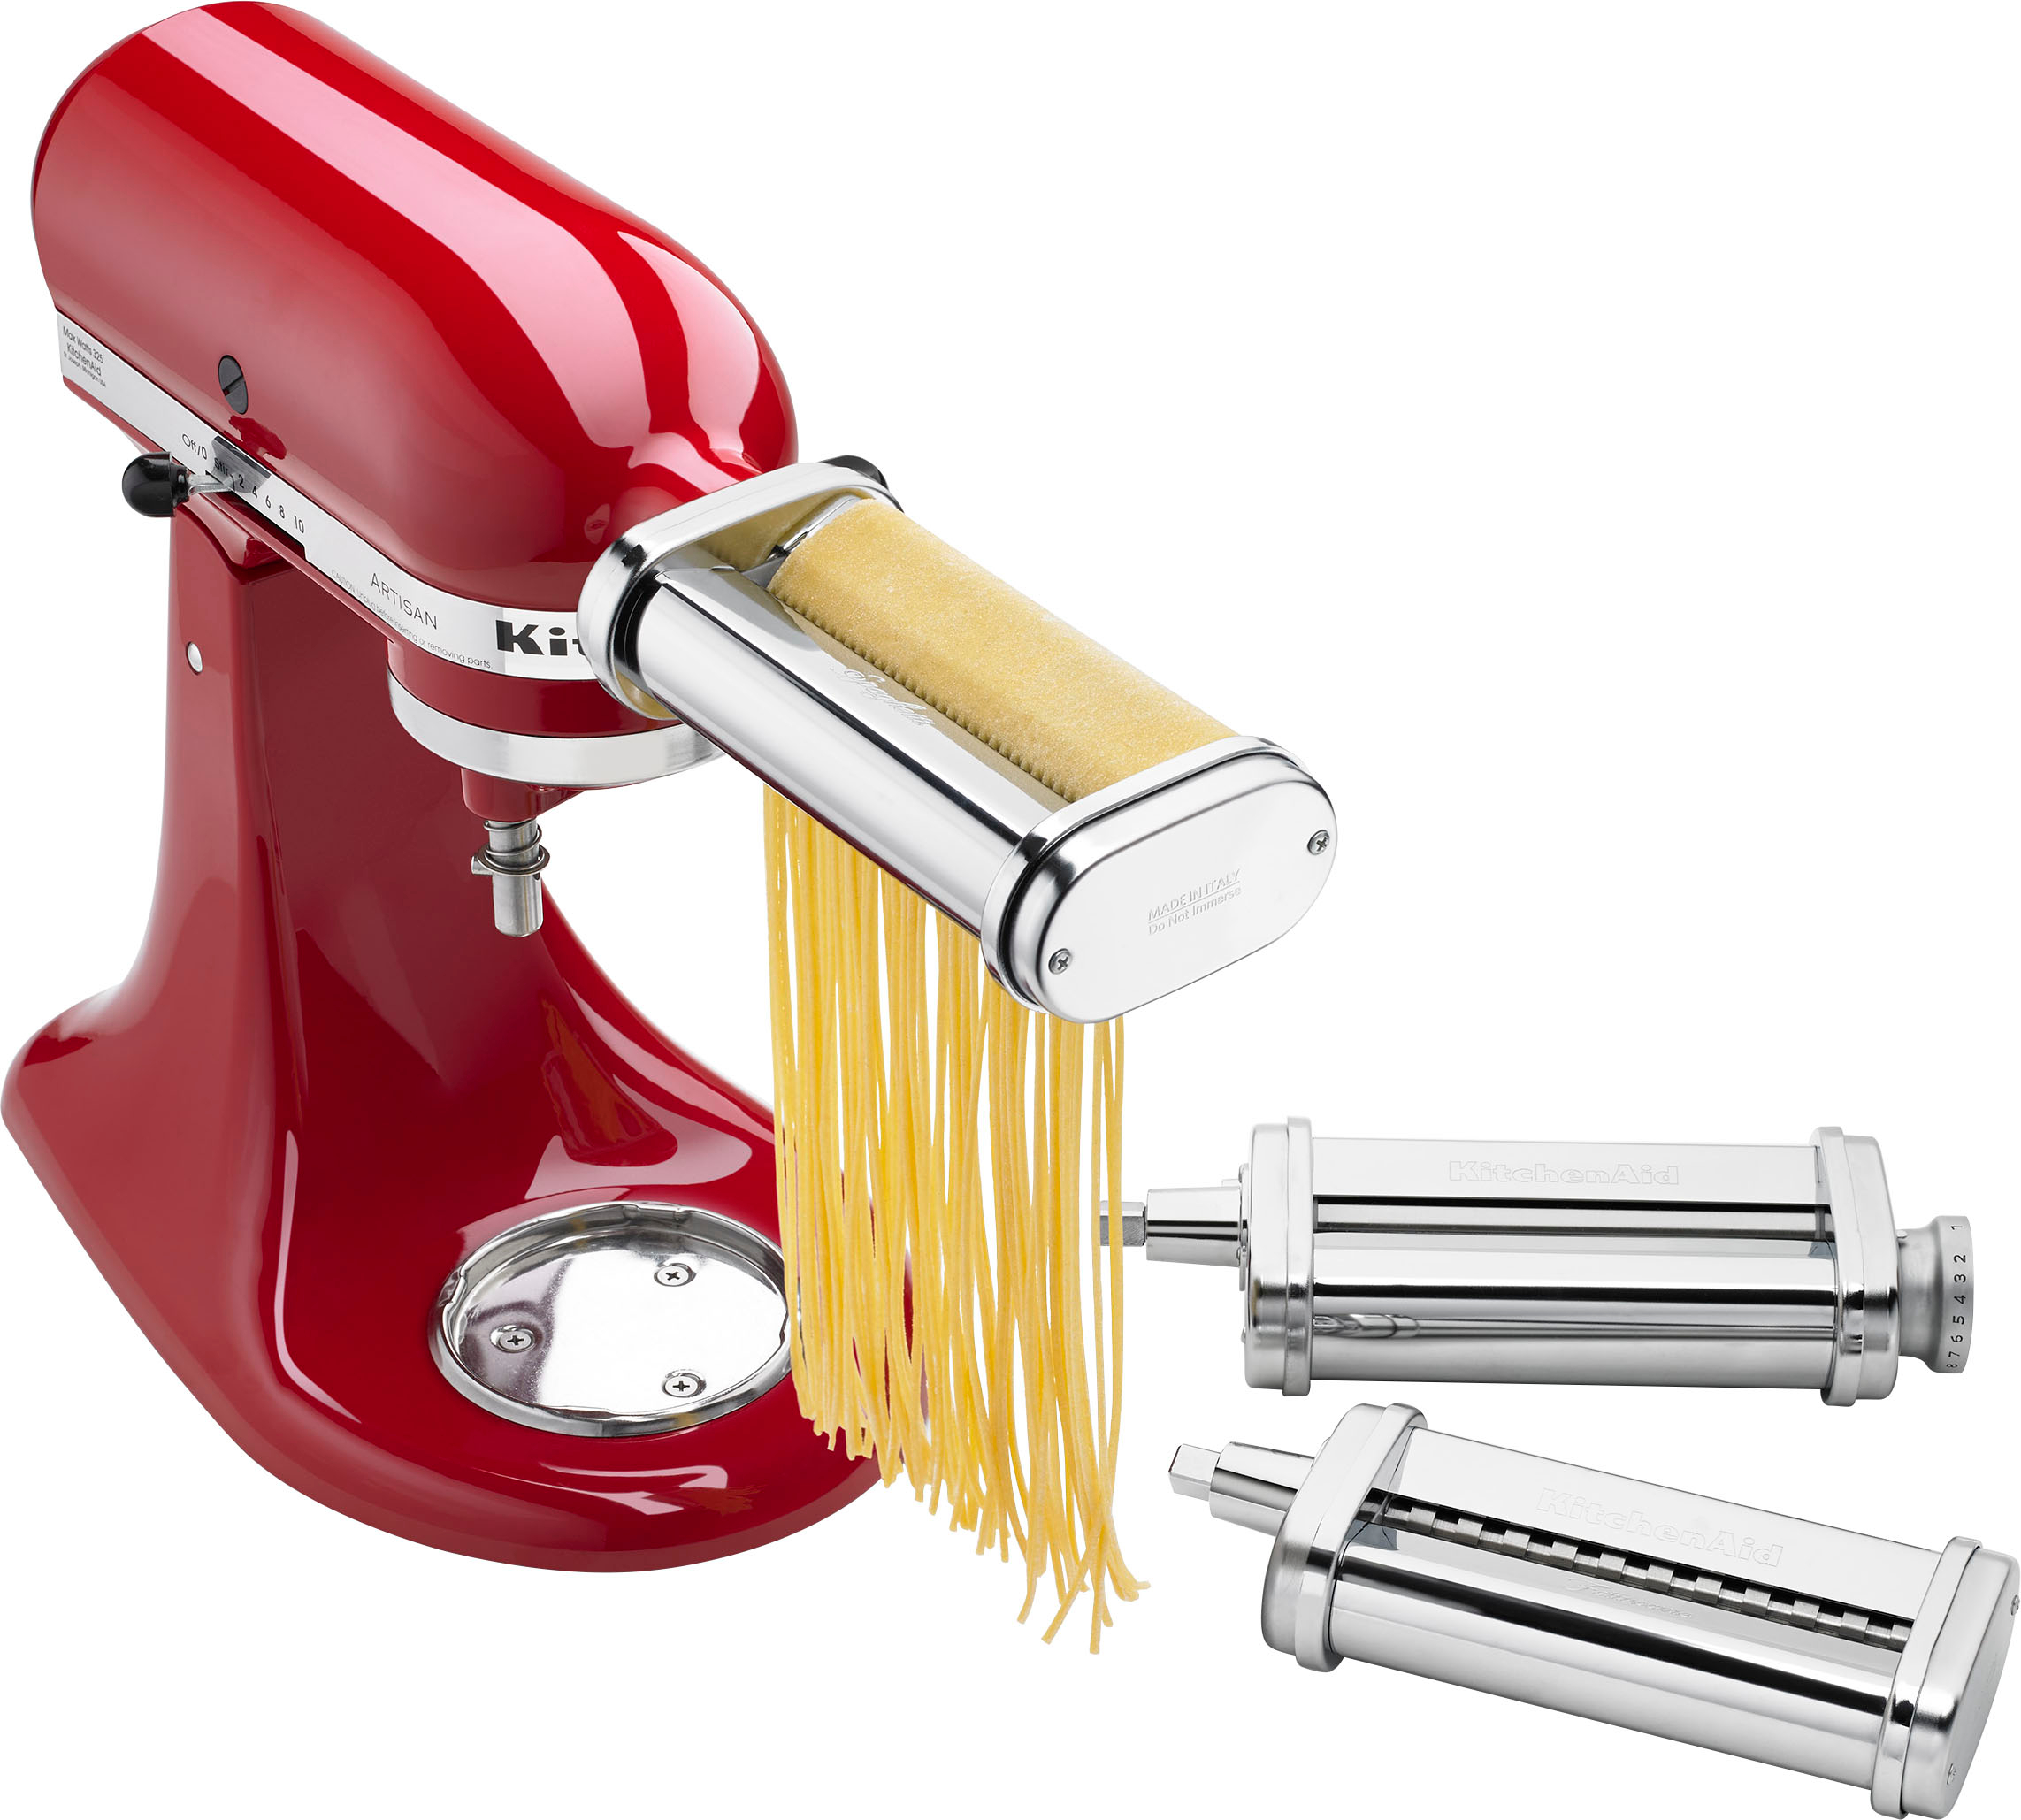 KSMPRA Pasta Roller Attachments for Most KitchenAid Stand Mixers    Stainless Steel